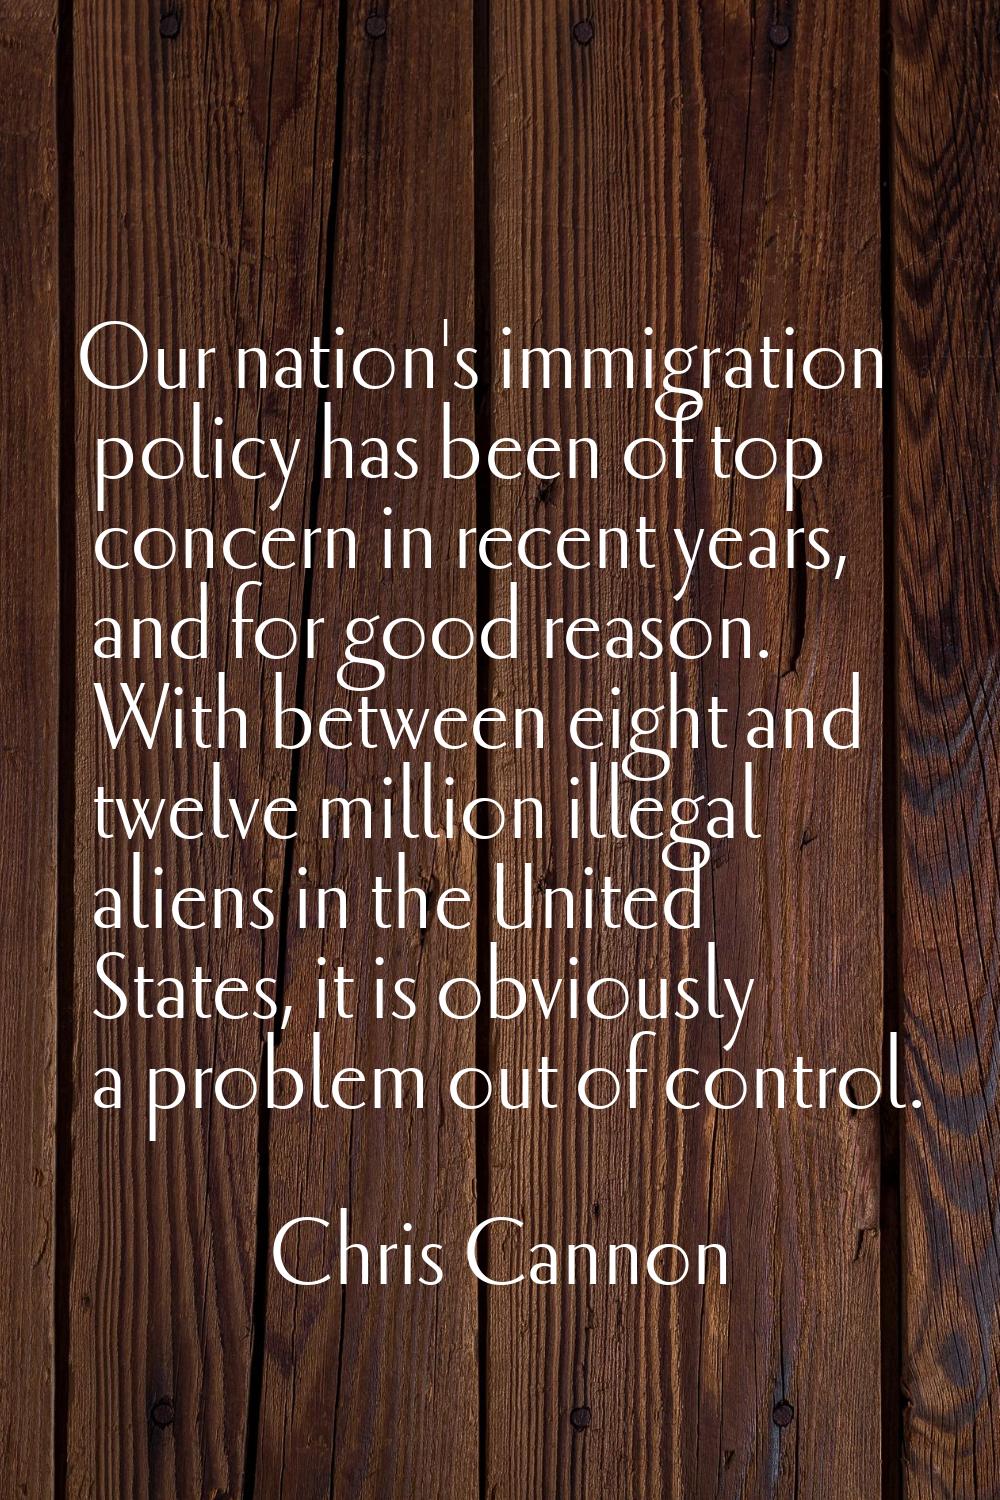 Our nation's immigration policy has been of top concern in recent years, and for good reason. With 